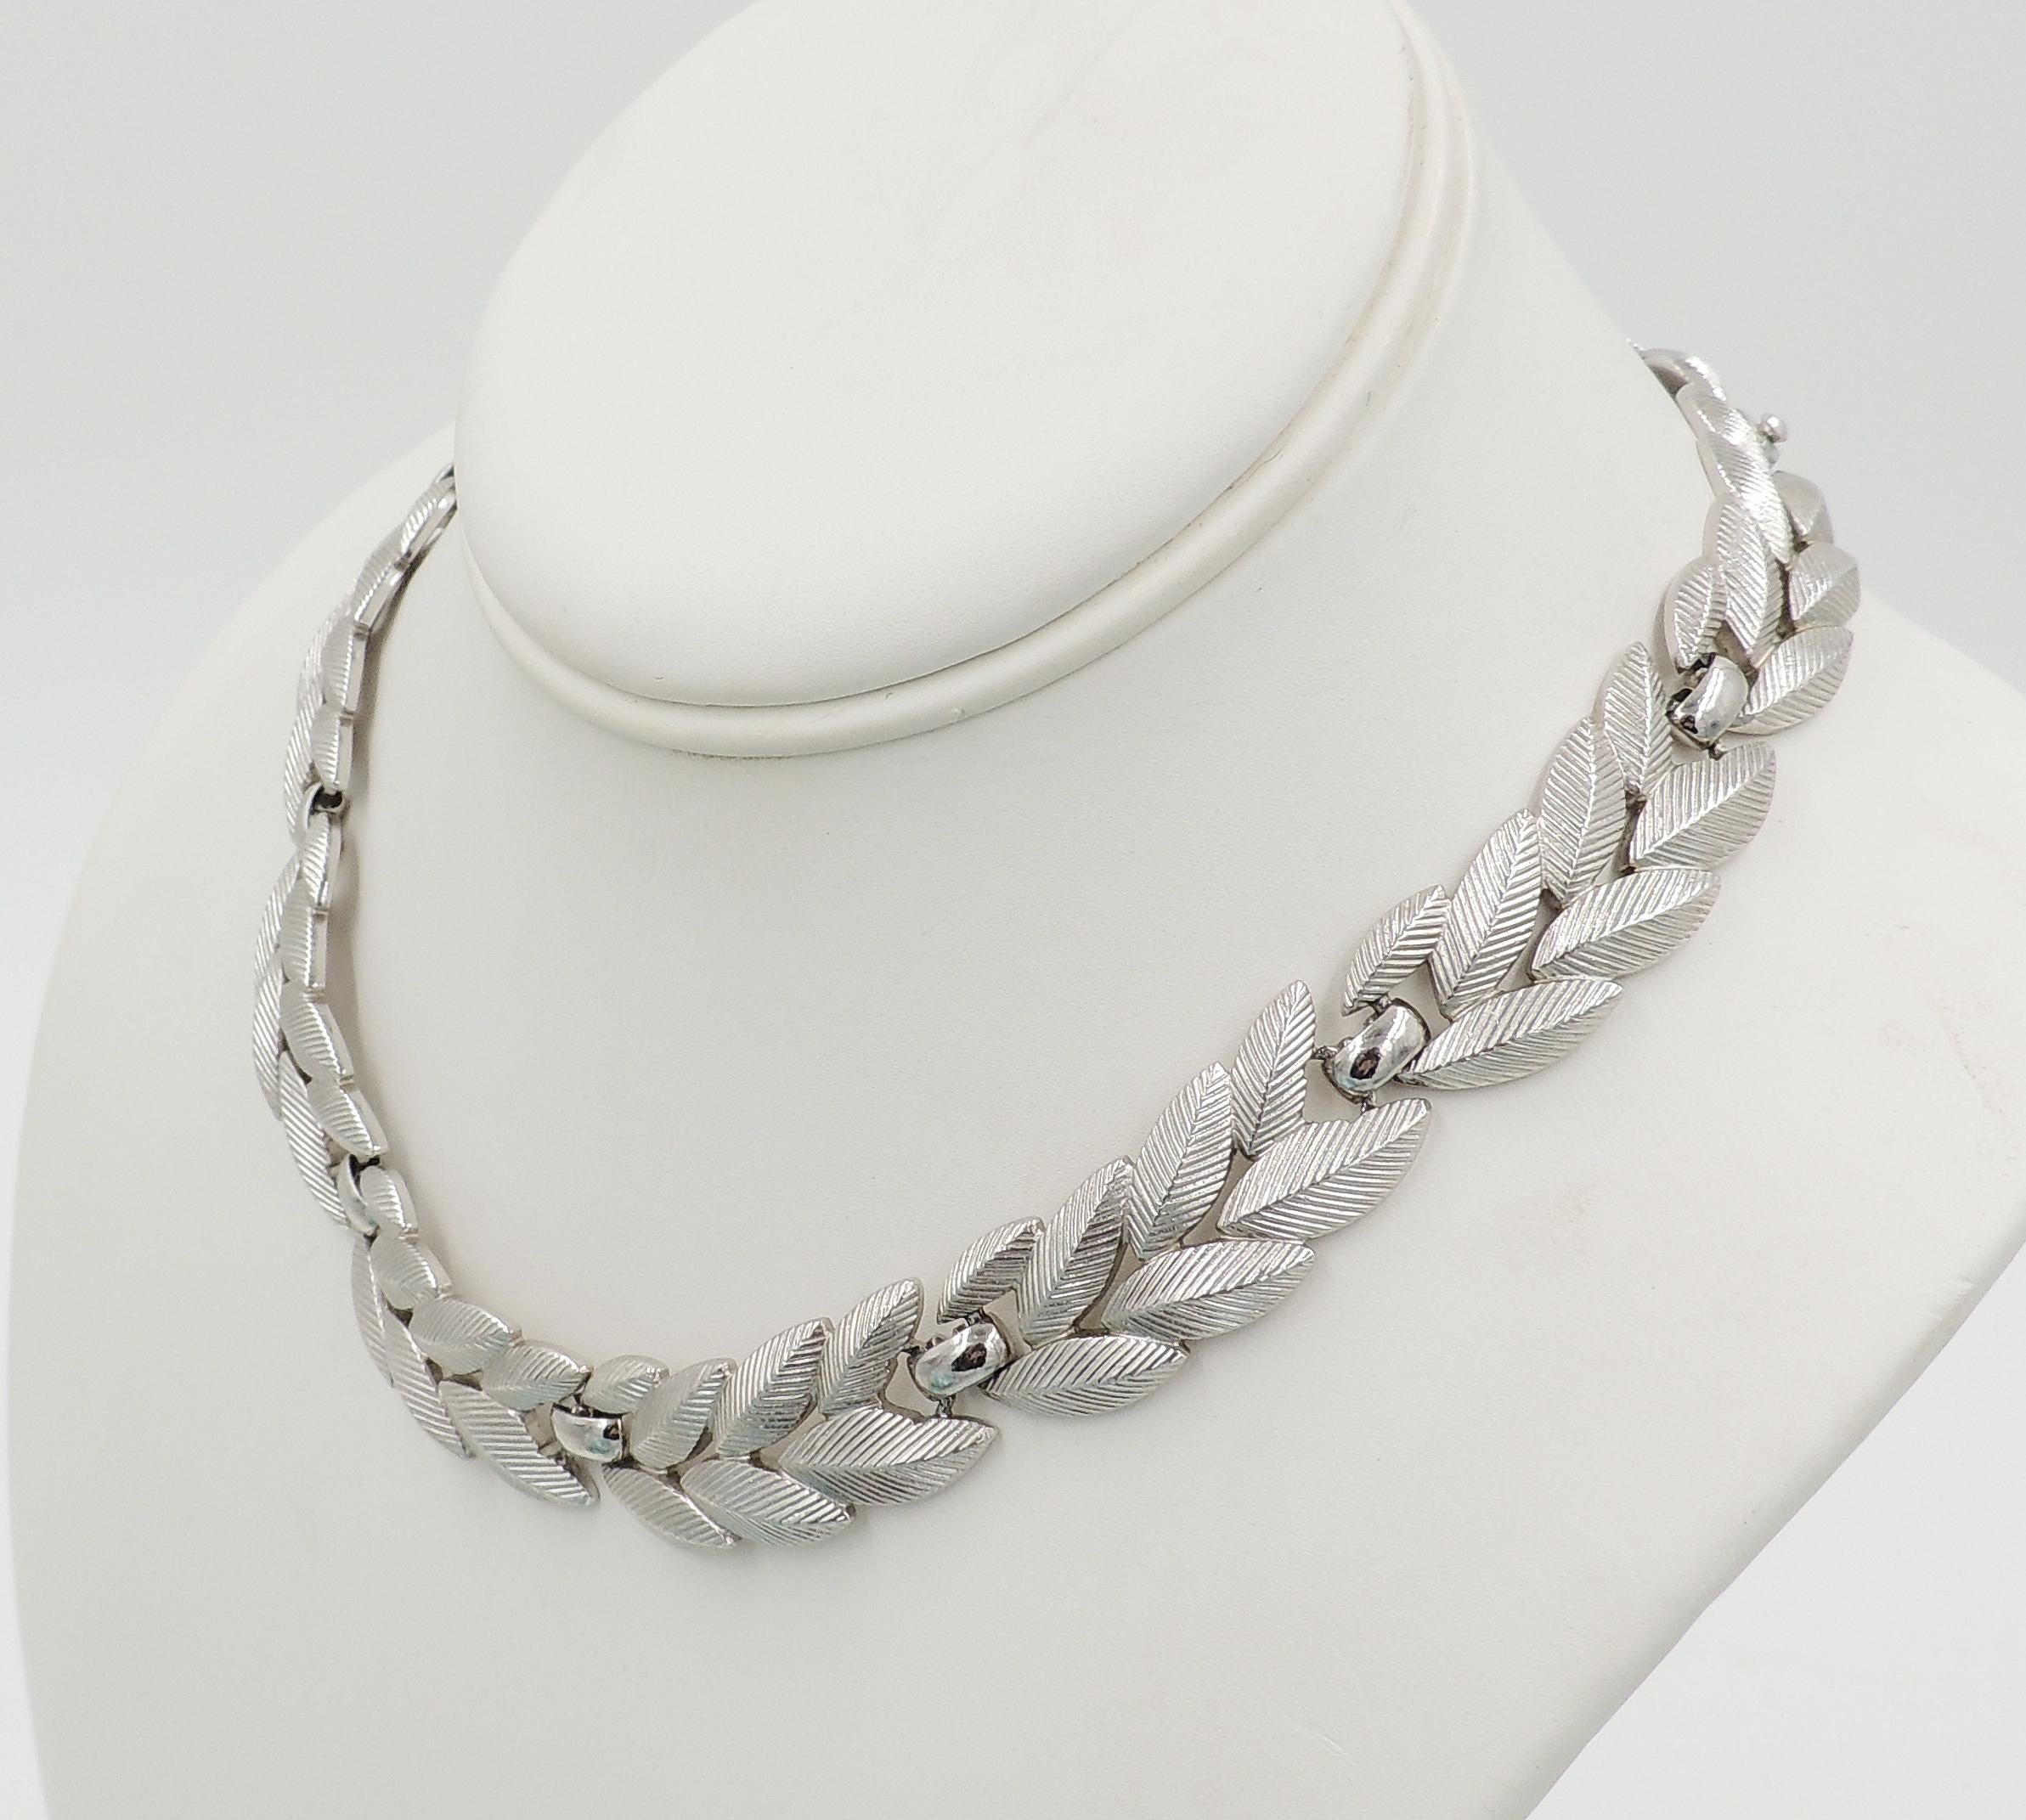 Women's Vintage Signed Monet Rhodium Plated Leaves Collar Necklace, 1956 Ad Piece For Sale